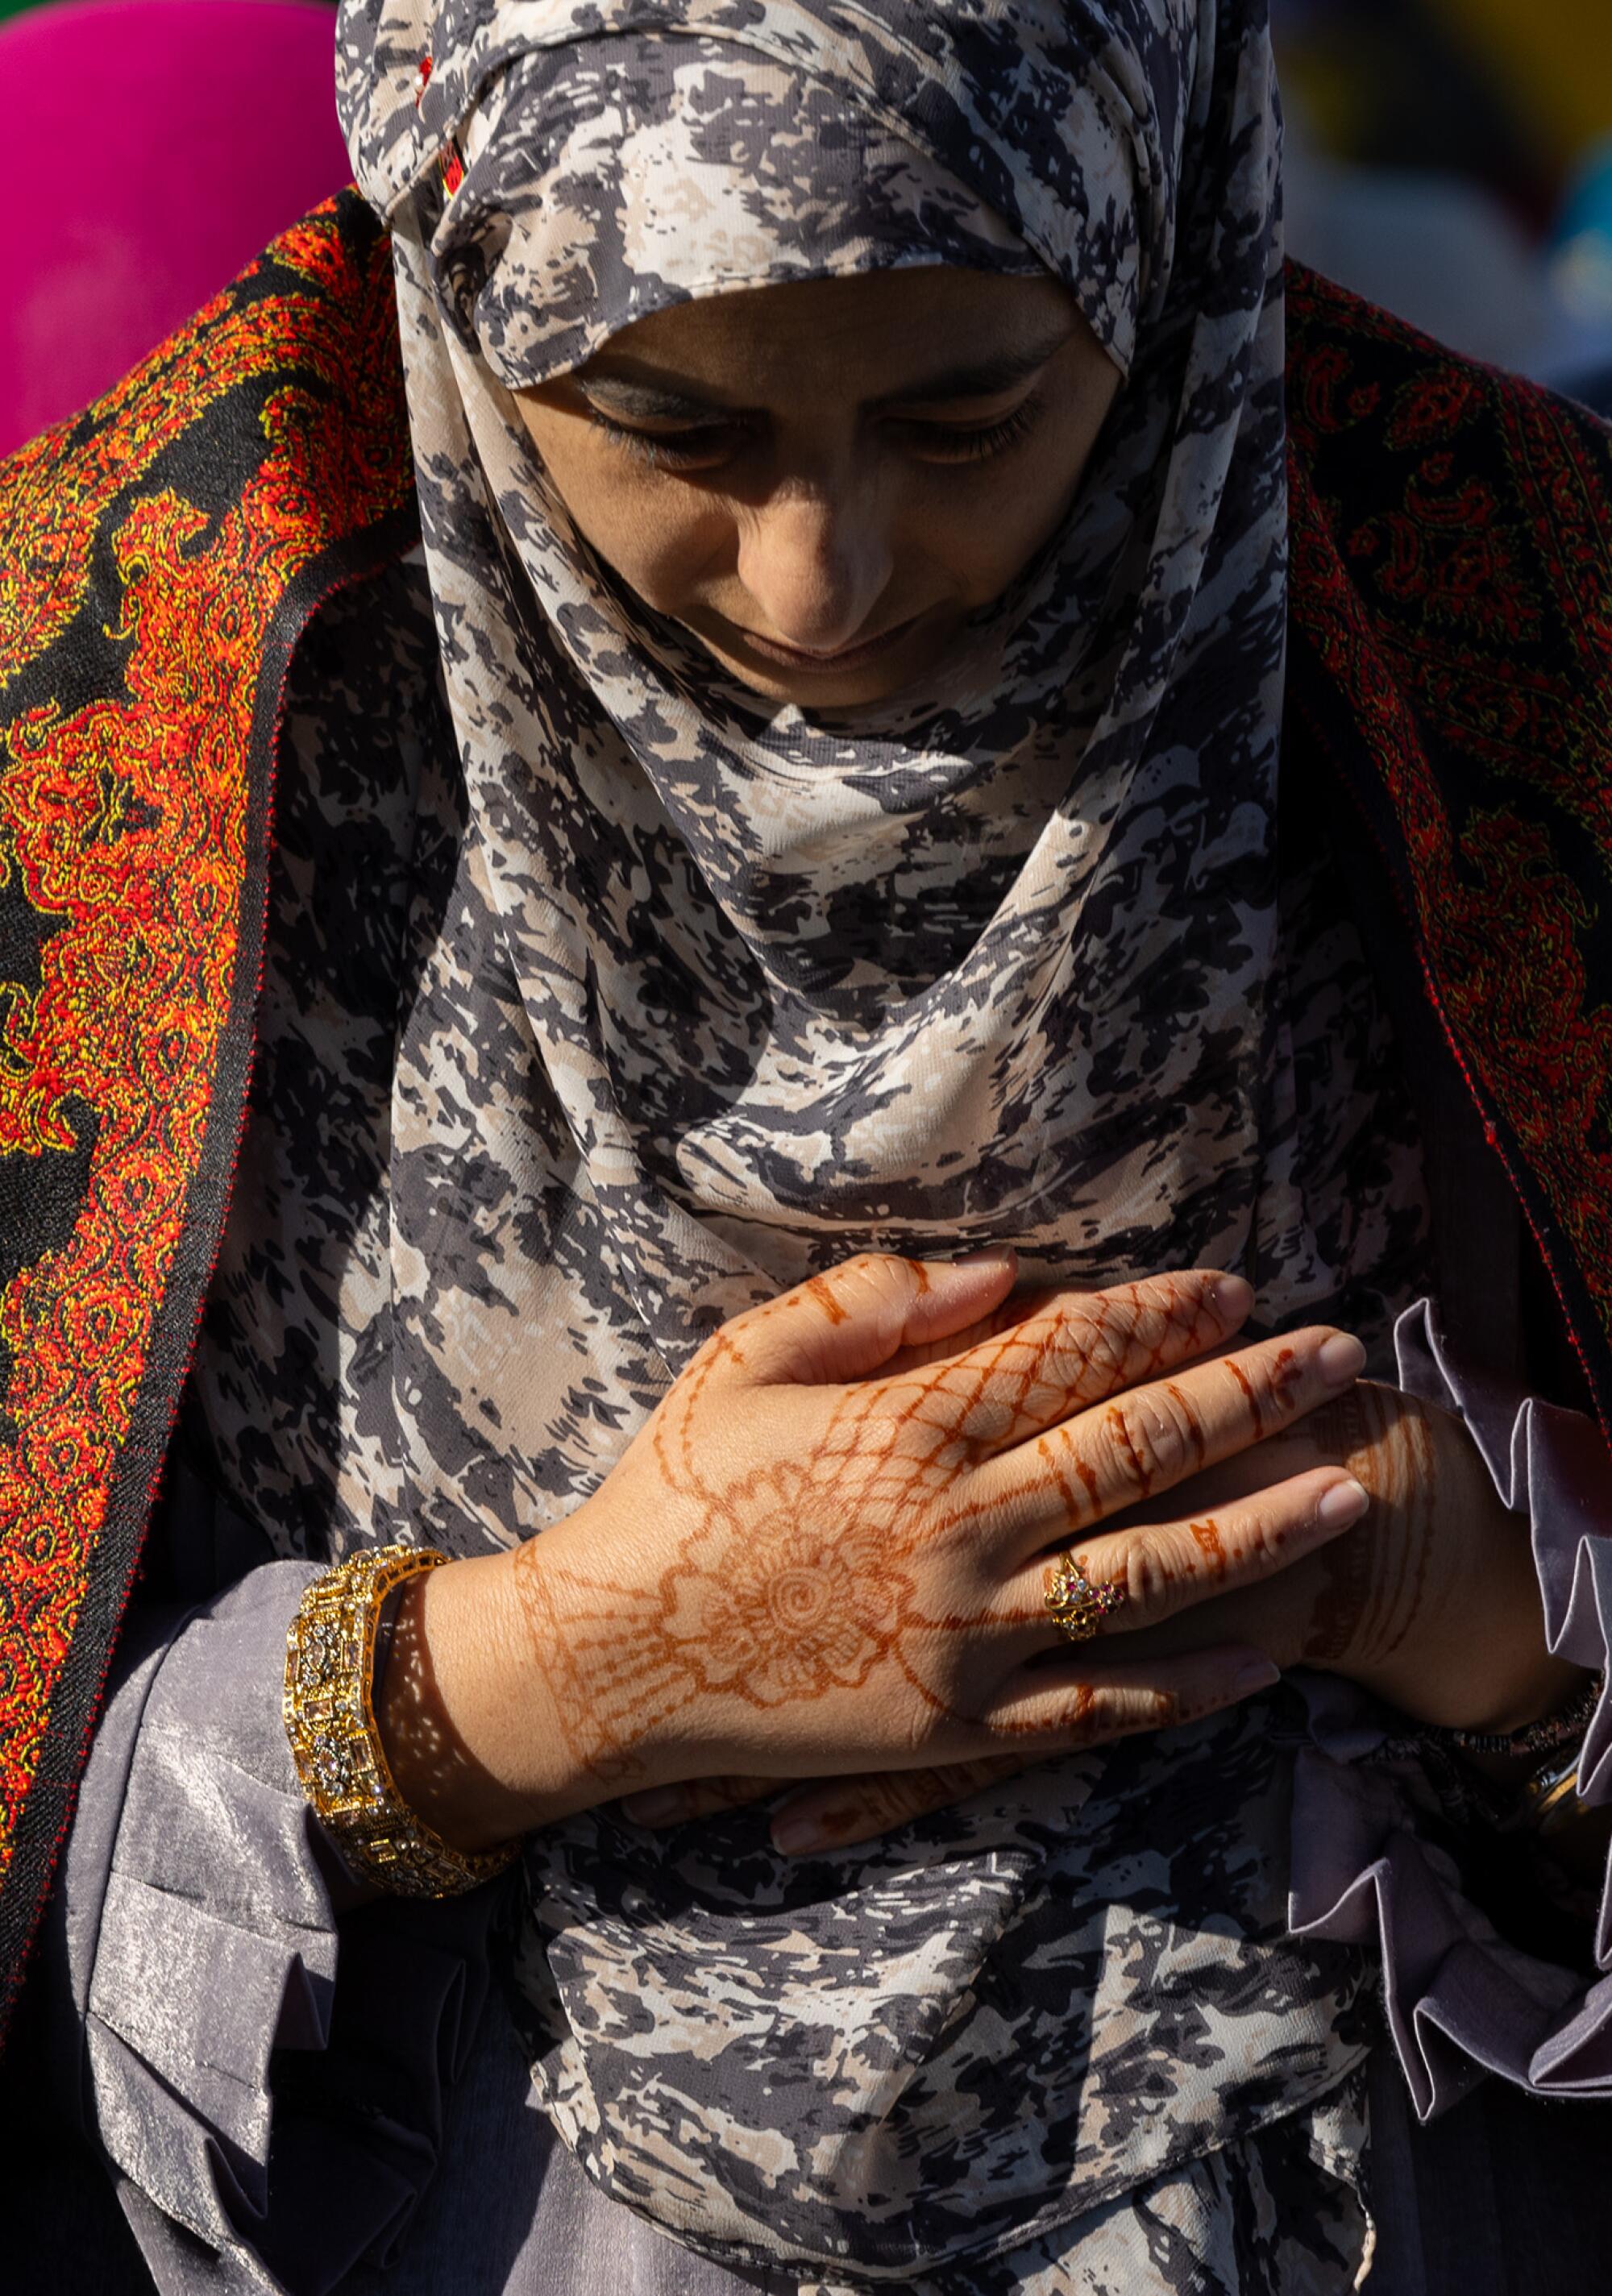 A woman with henna tattoos prays at the Pierce College football stadium in Los Angeles.